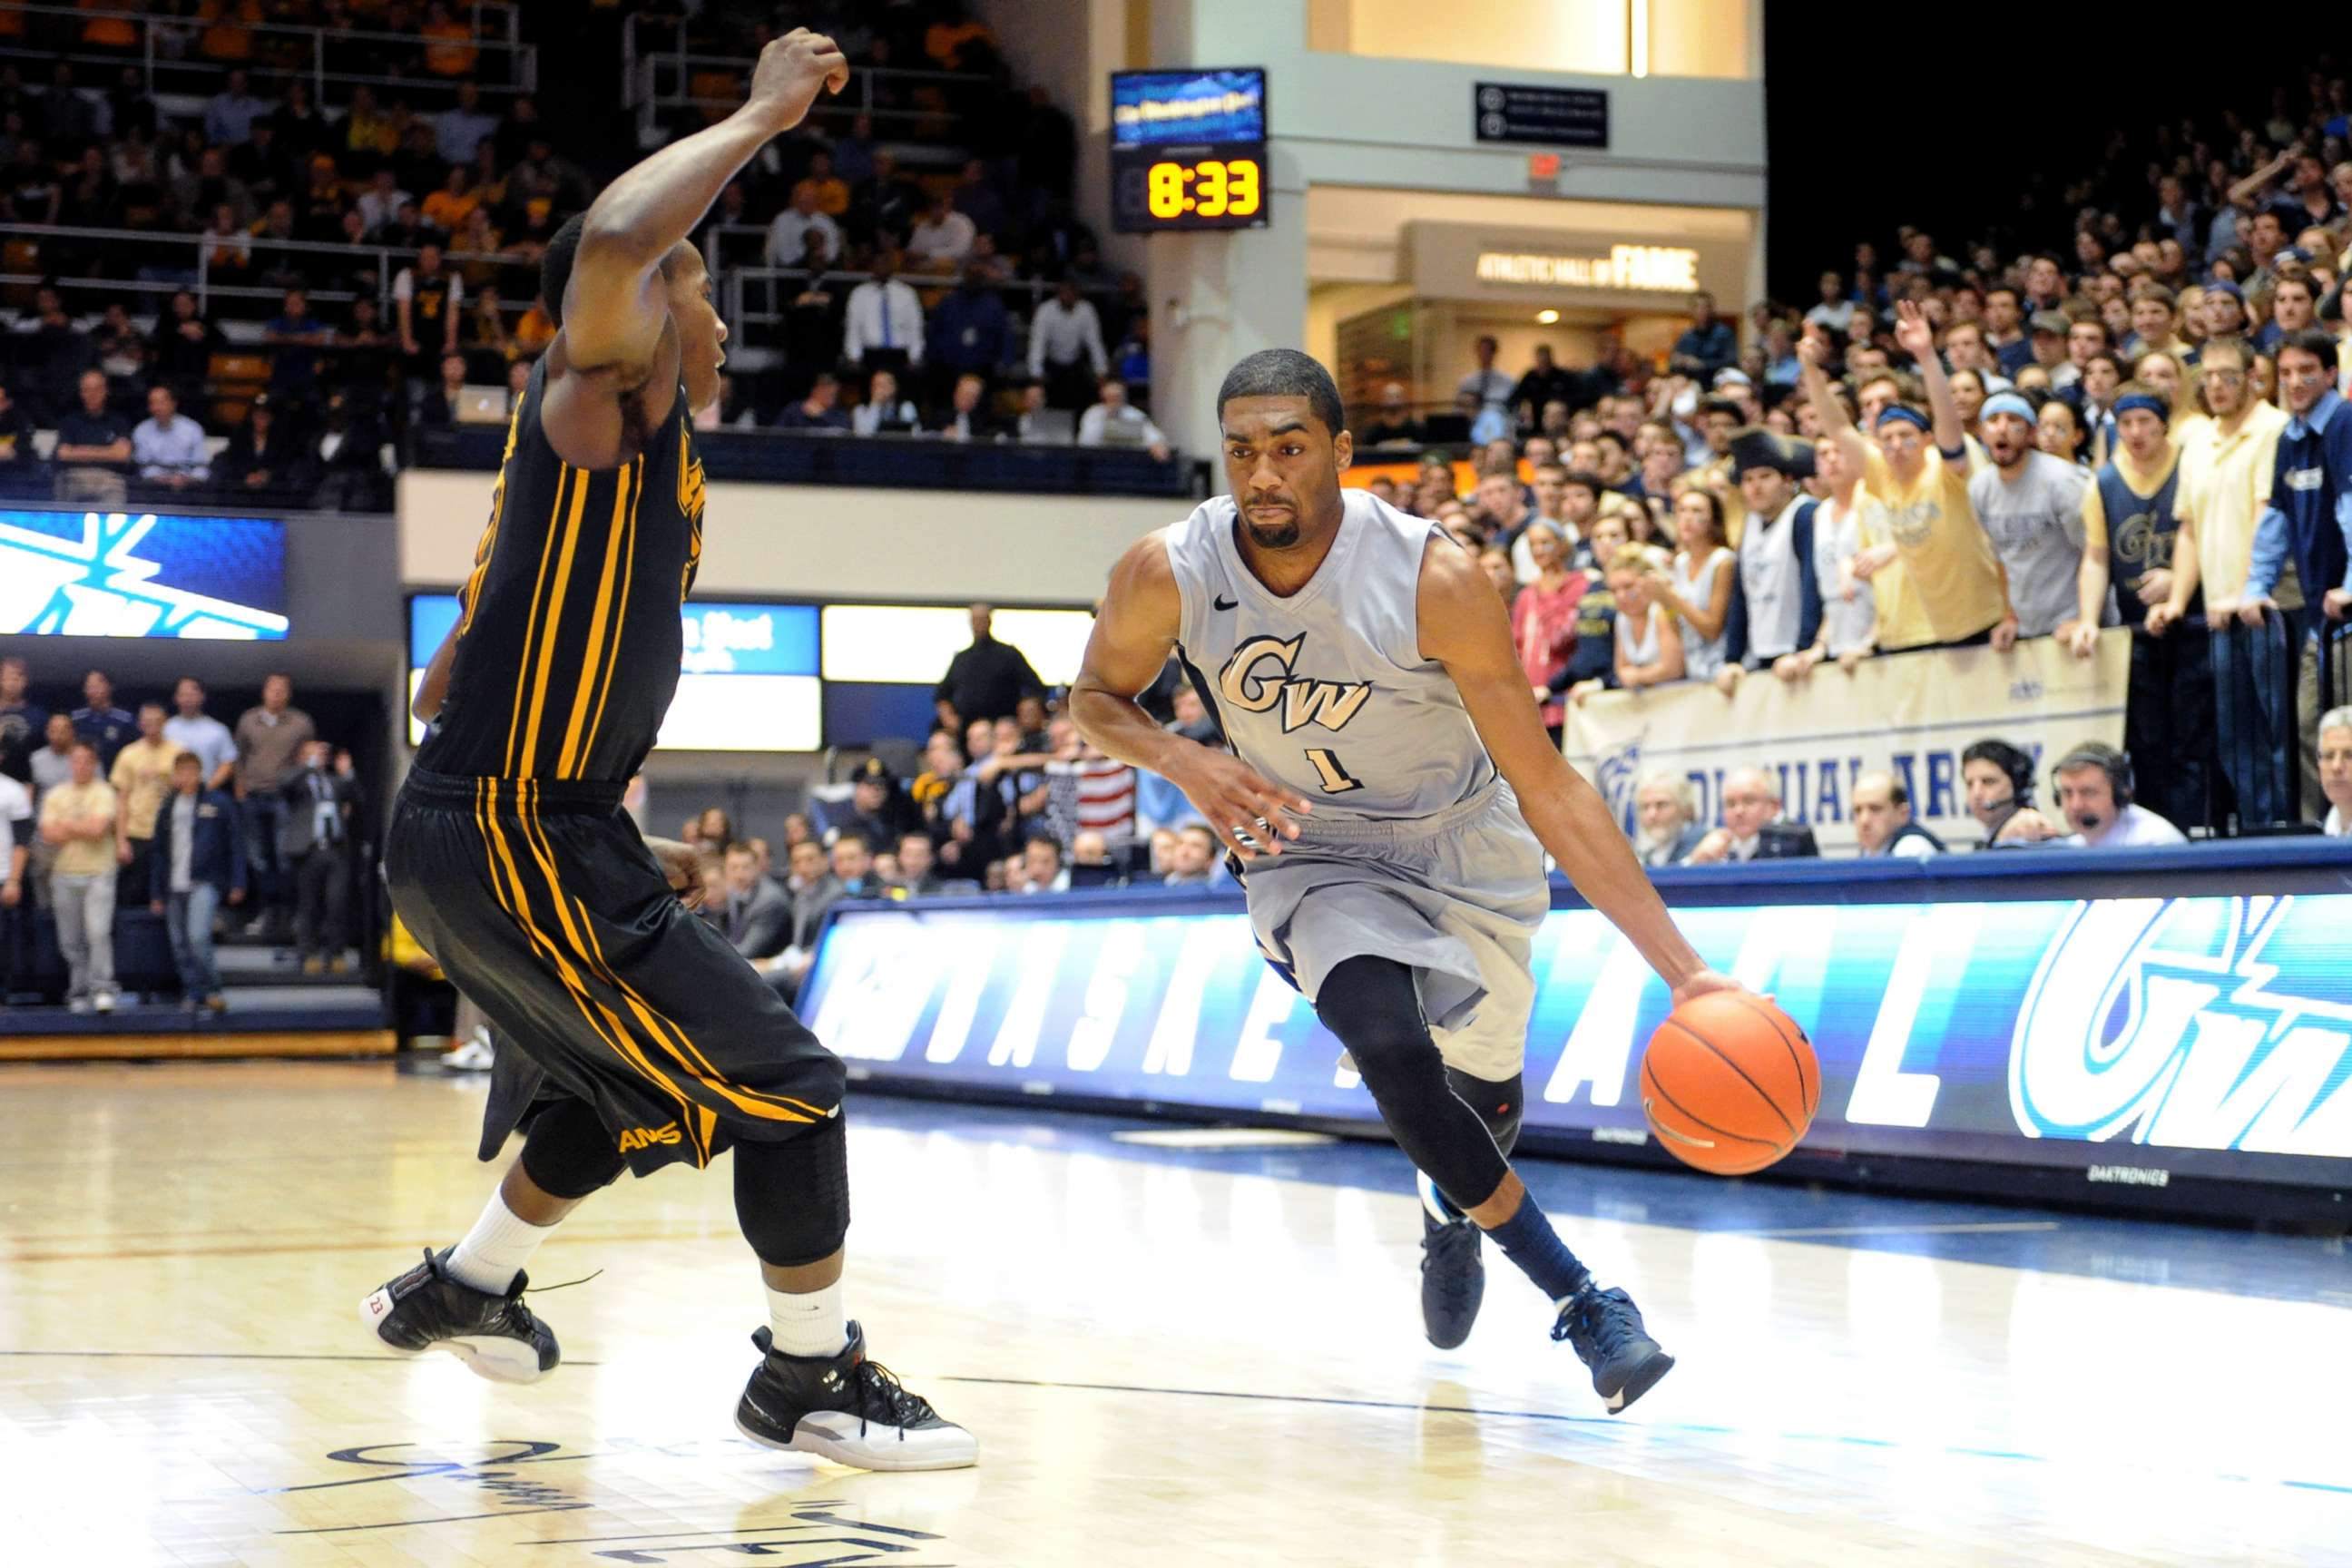 PHOTO: In this Jan. 14, 2014, file photo, Maurice Creek of the George Washington Colonials dribbles the ball during a college basketball game against the George Washington Colonials at the Smith Center in Washington, D.C.